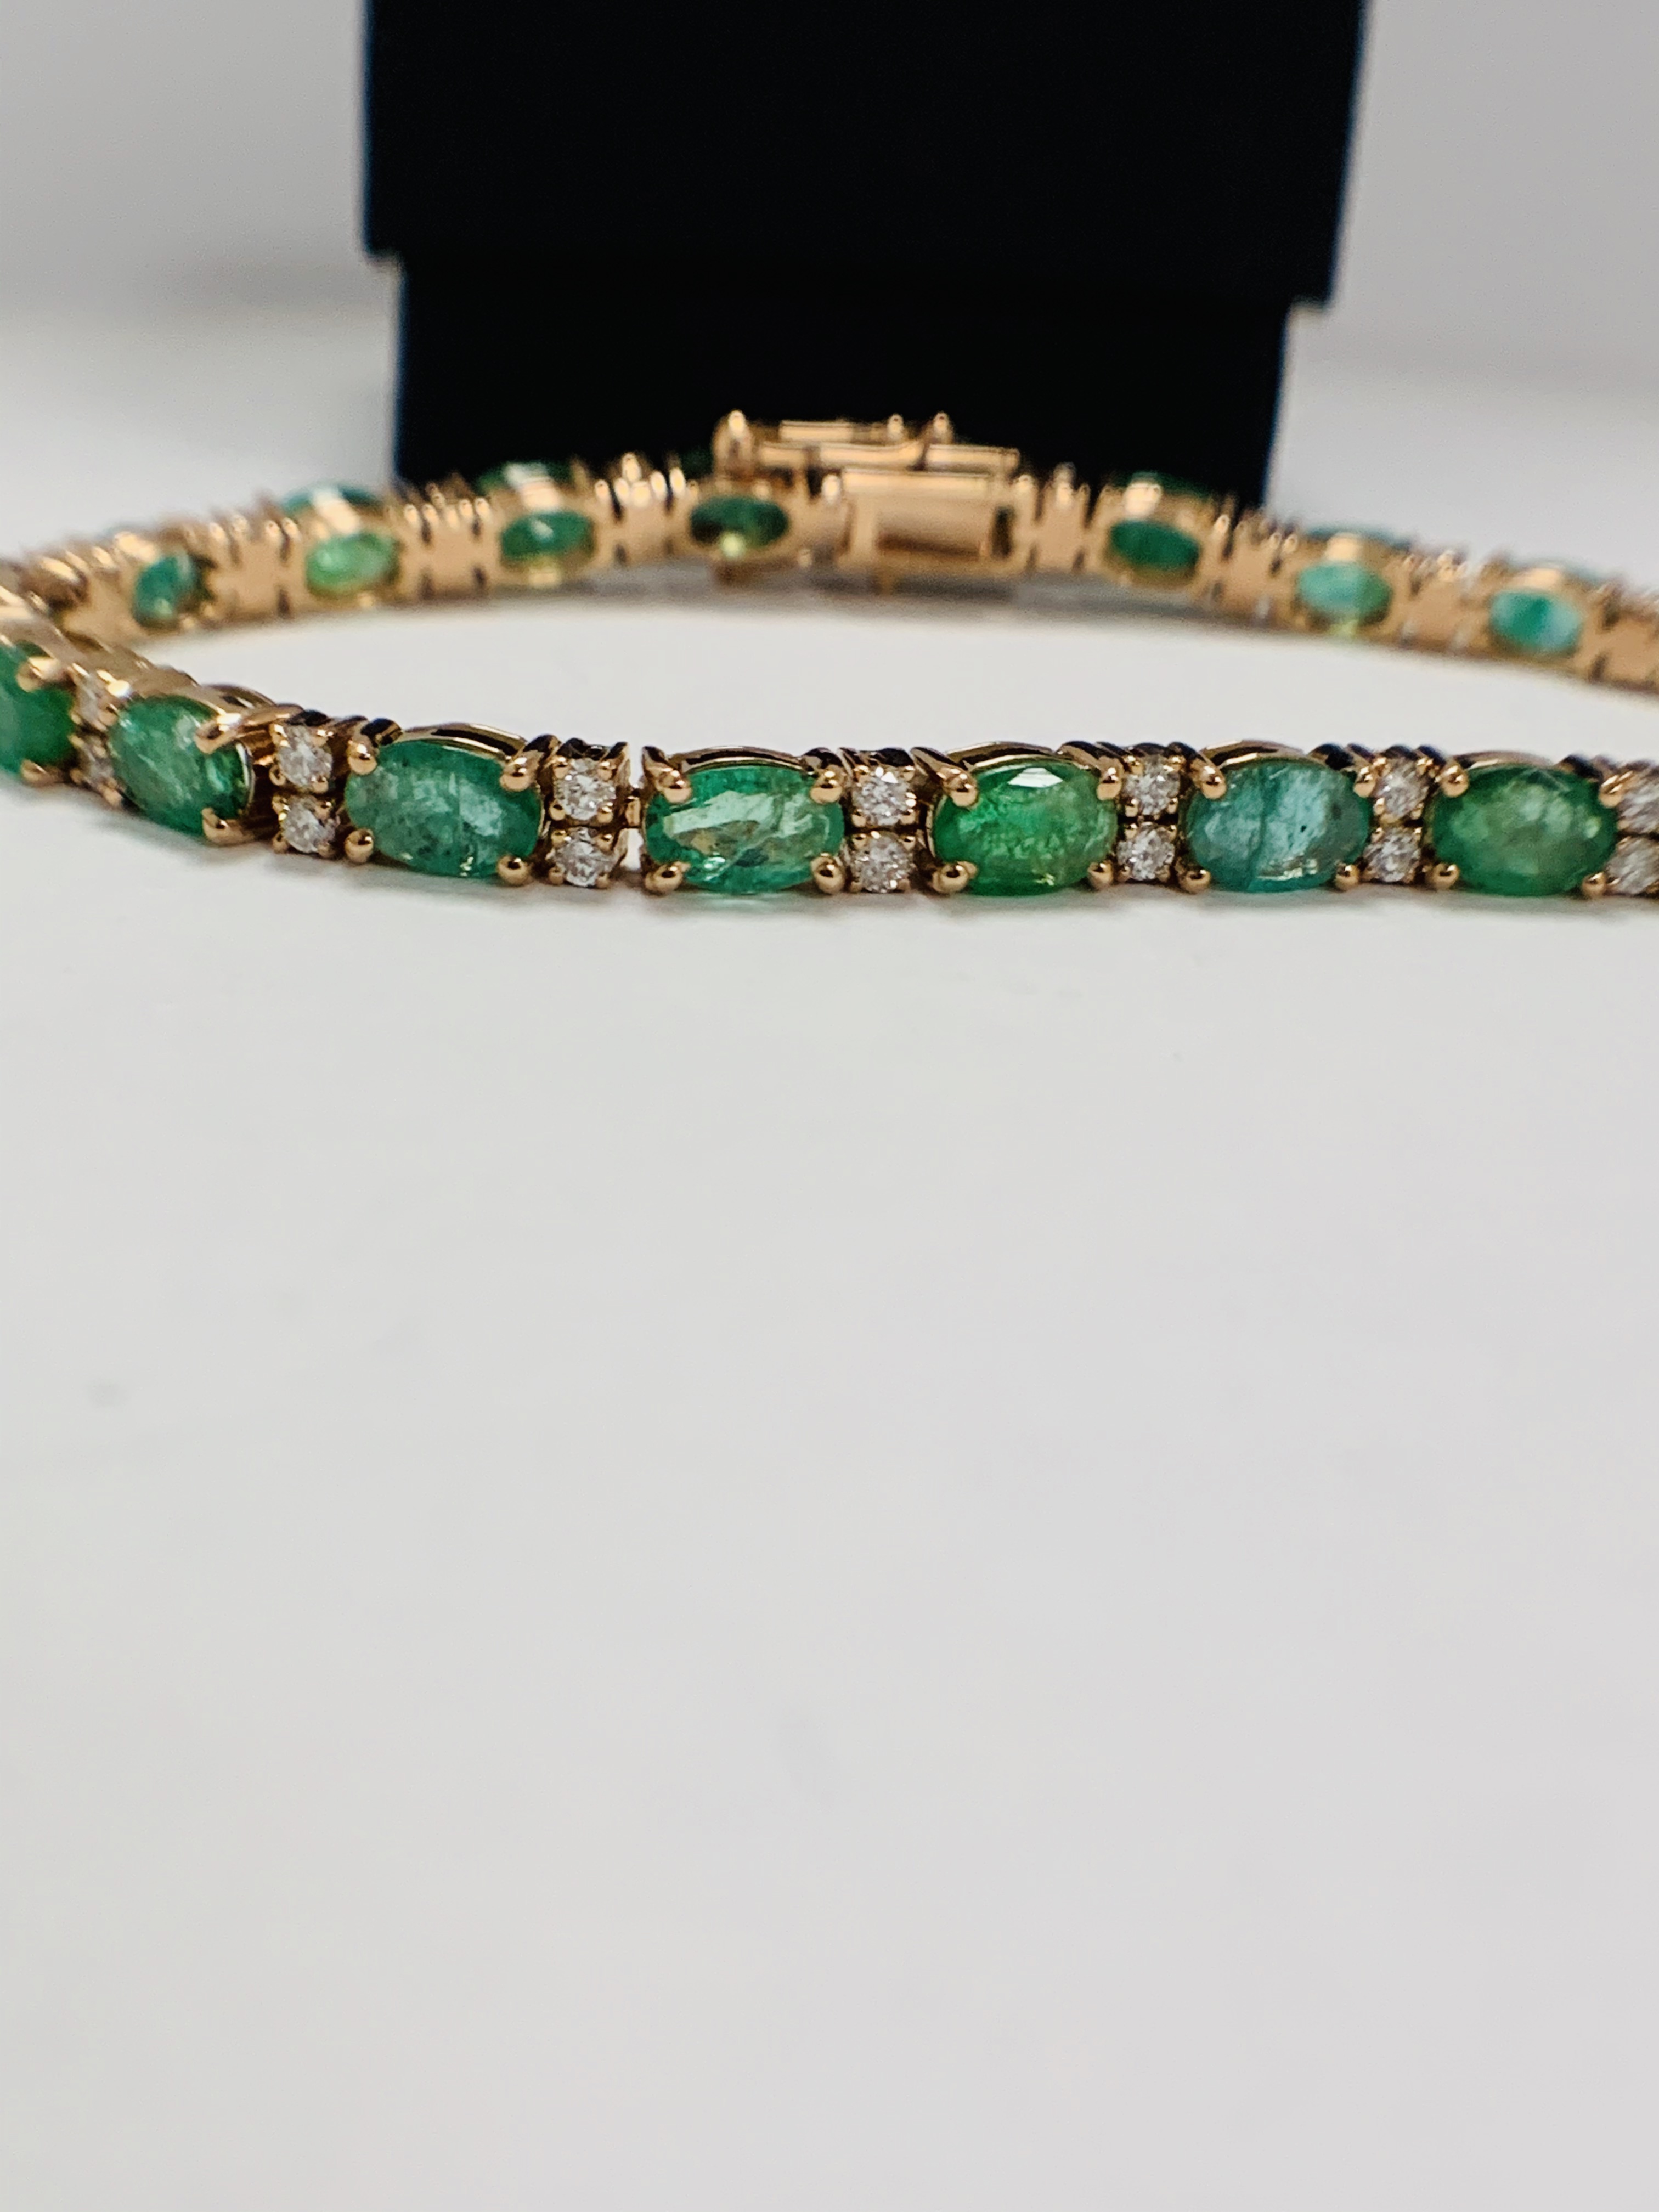 14ct Rose Gold Emerald and Diamond bracelet featuring, 21 oval cut, light green Emeralds (9.03ct TSW - Image 8 of 19